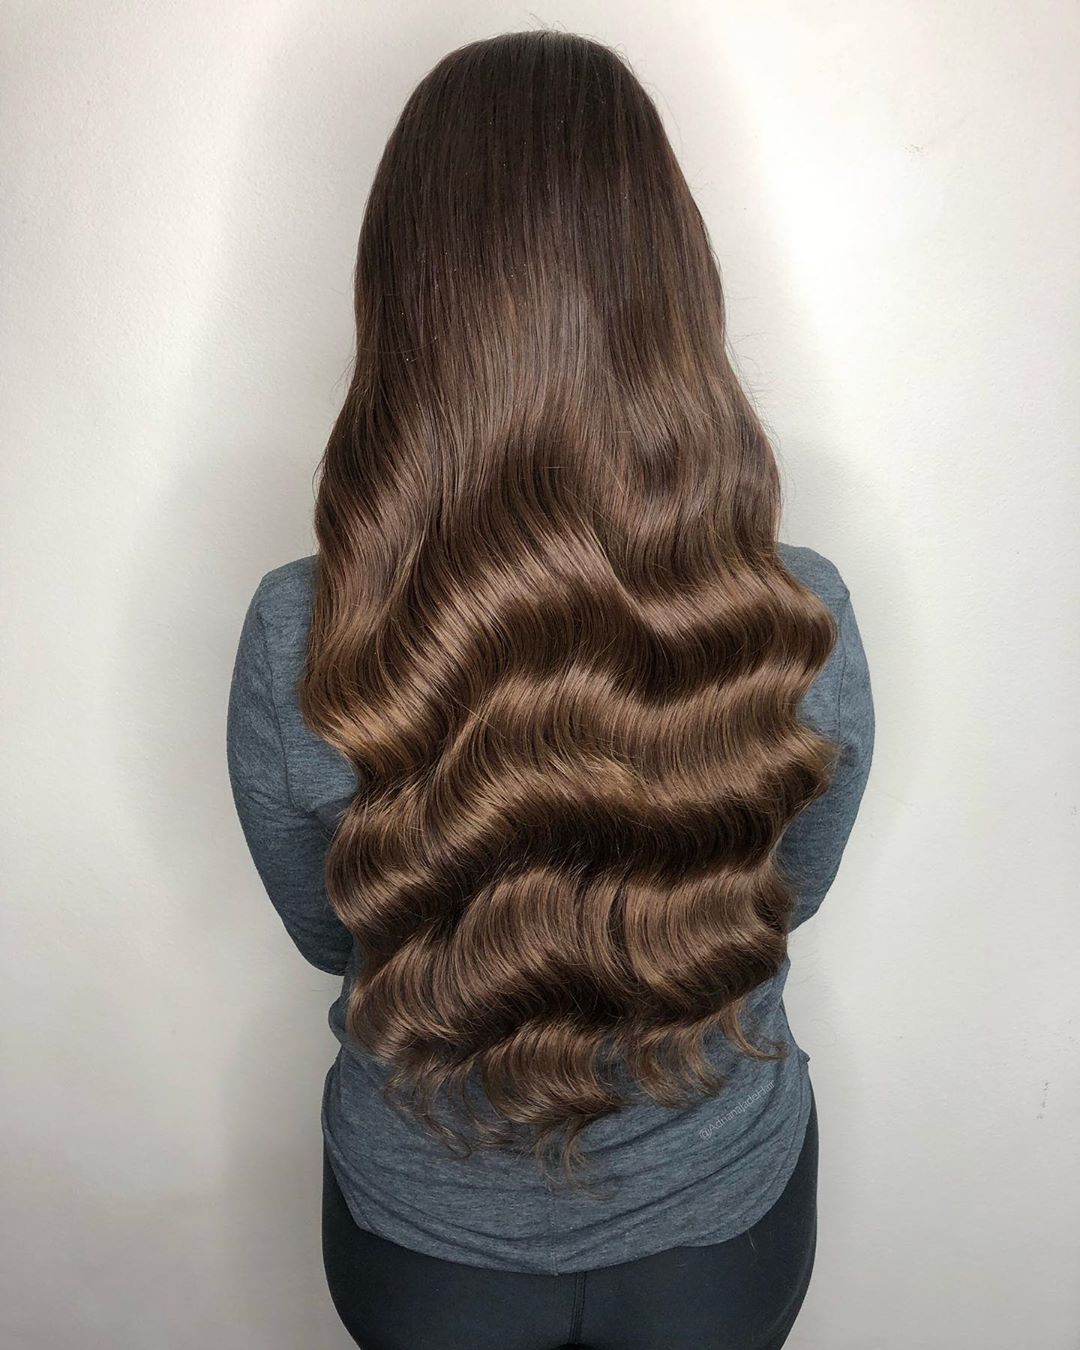 Polished Curls for Long Hair